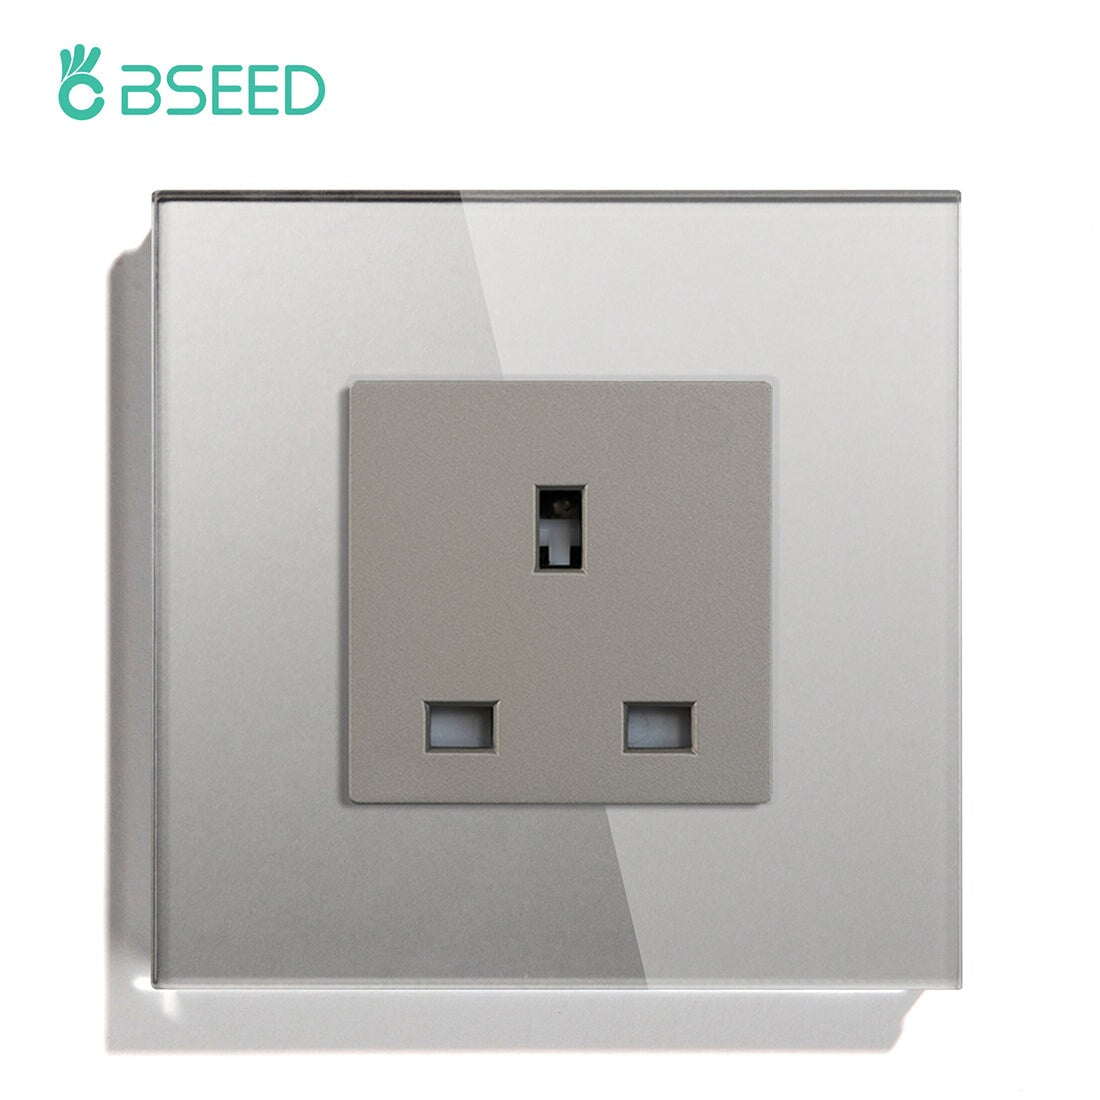 BSEED UK Wall Sockets Single Power Outlets Kids Protection 16A Power Outlets & Sockets Bseedswitch grey Signle 